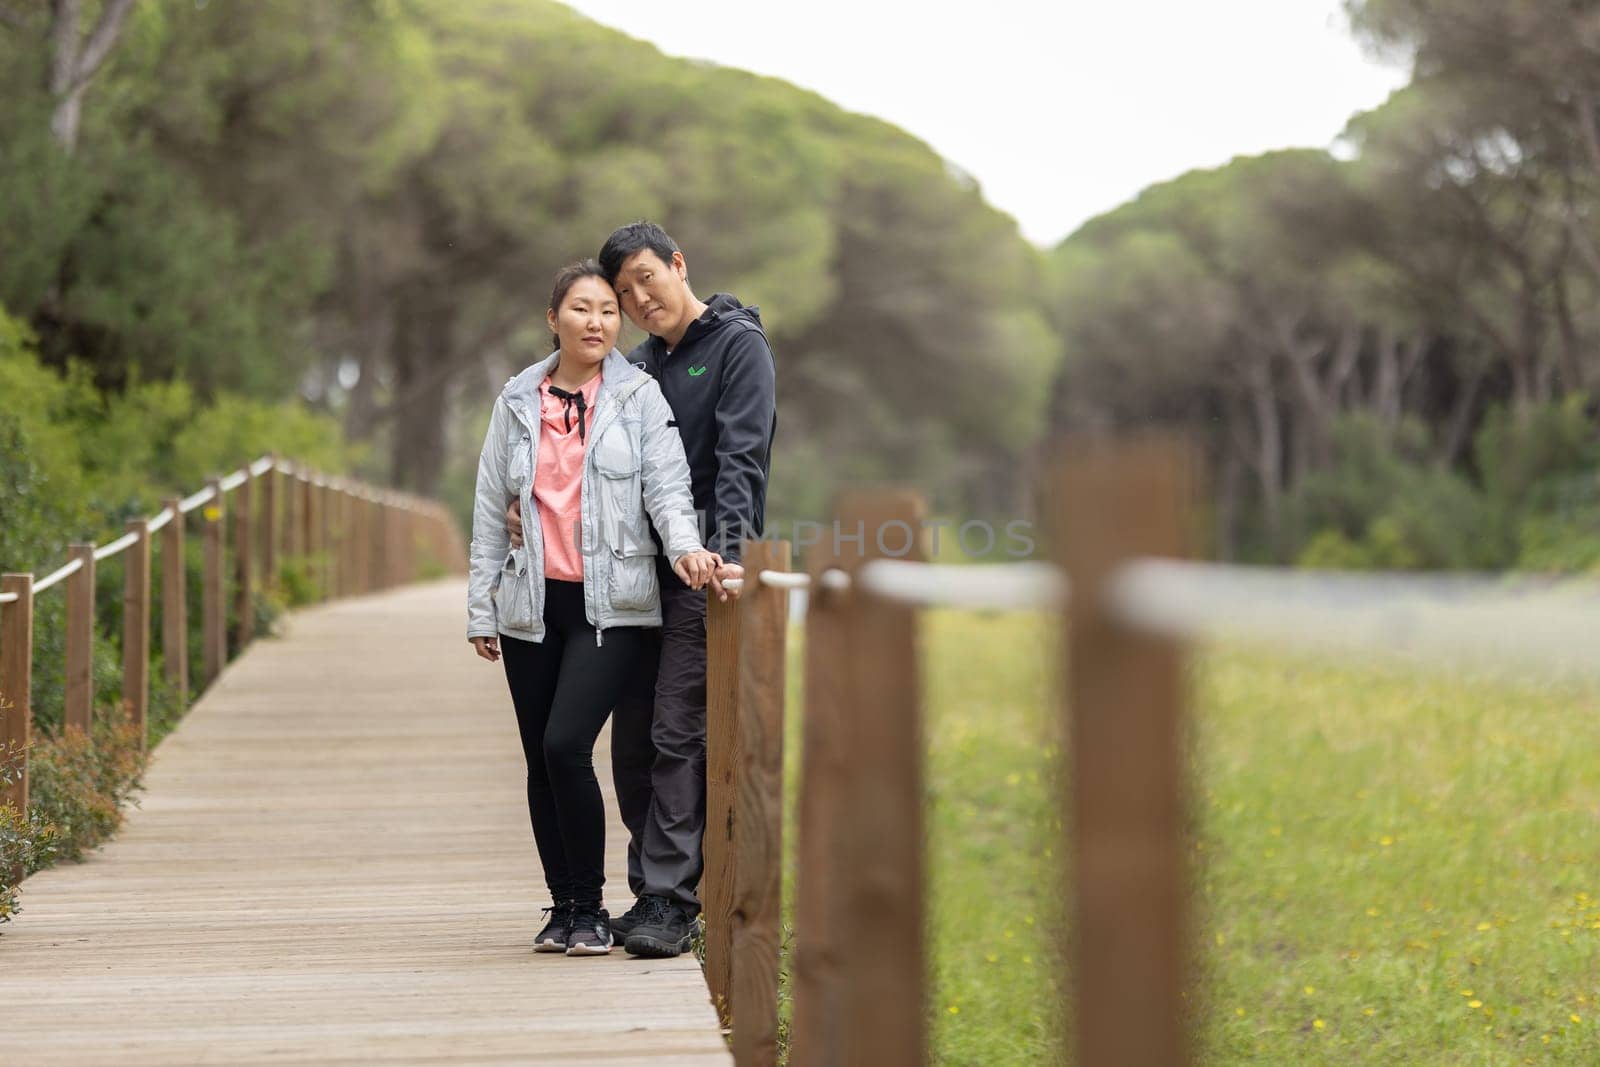 A couple standing on a wooden bridge, one of them wearing a pink shirt. Scene is romantic and peaceful